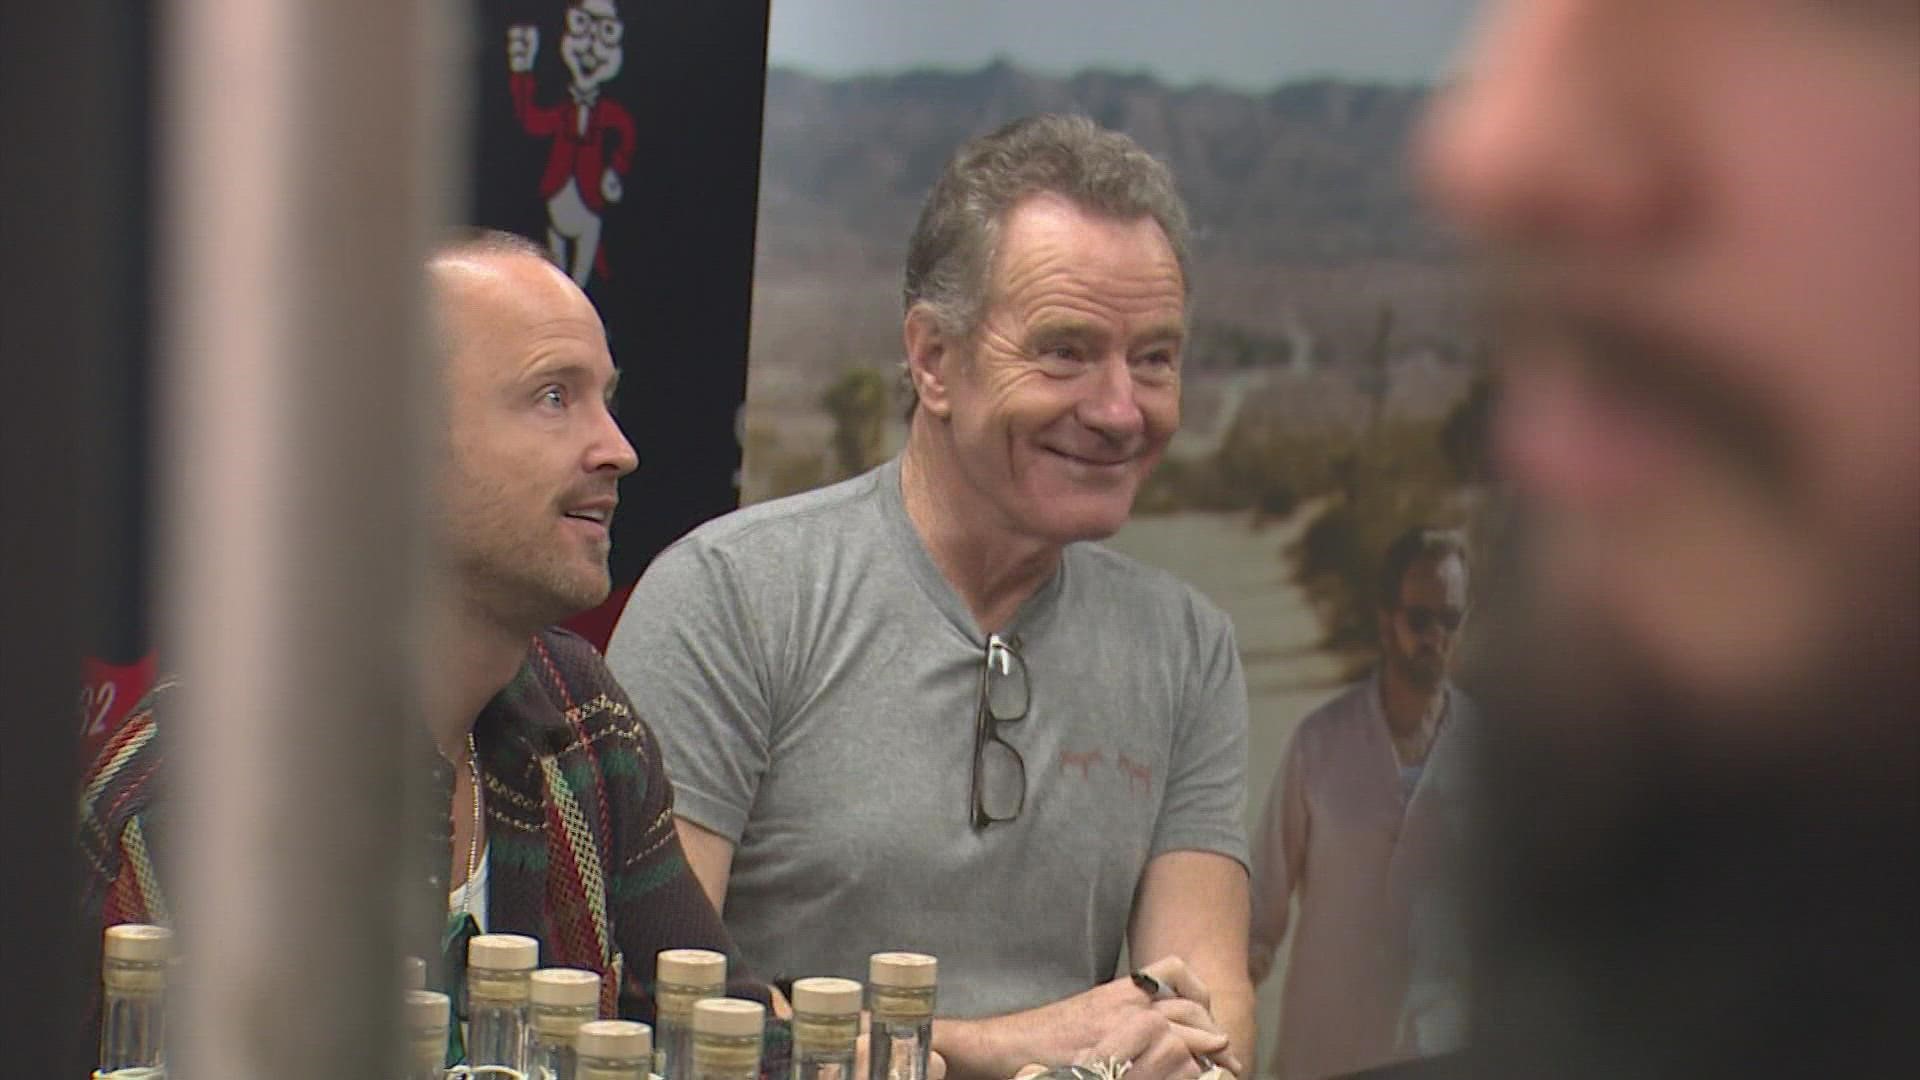 This time Brian Cranston and Aaron Paul are cooking up mezcal and hundreds of lucky fans waited in line at Spec's to get their bottles signed.